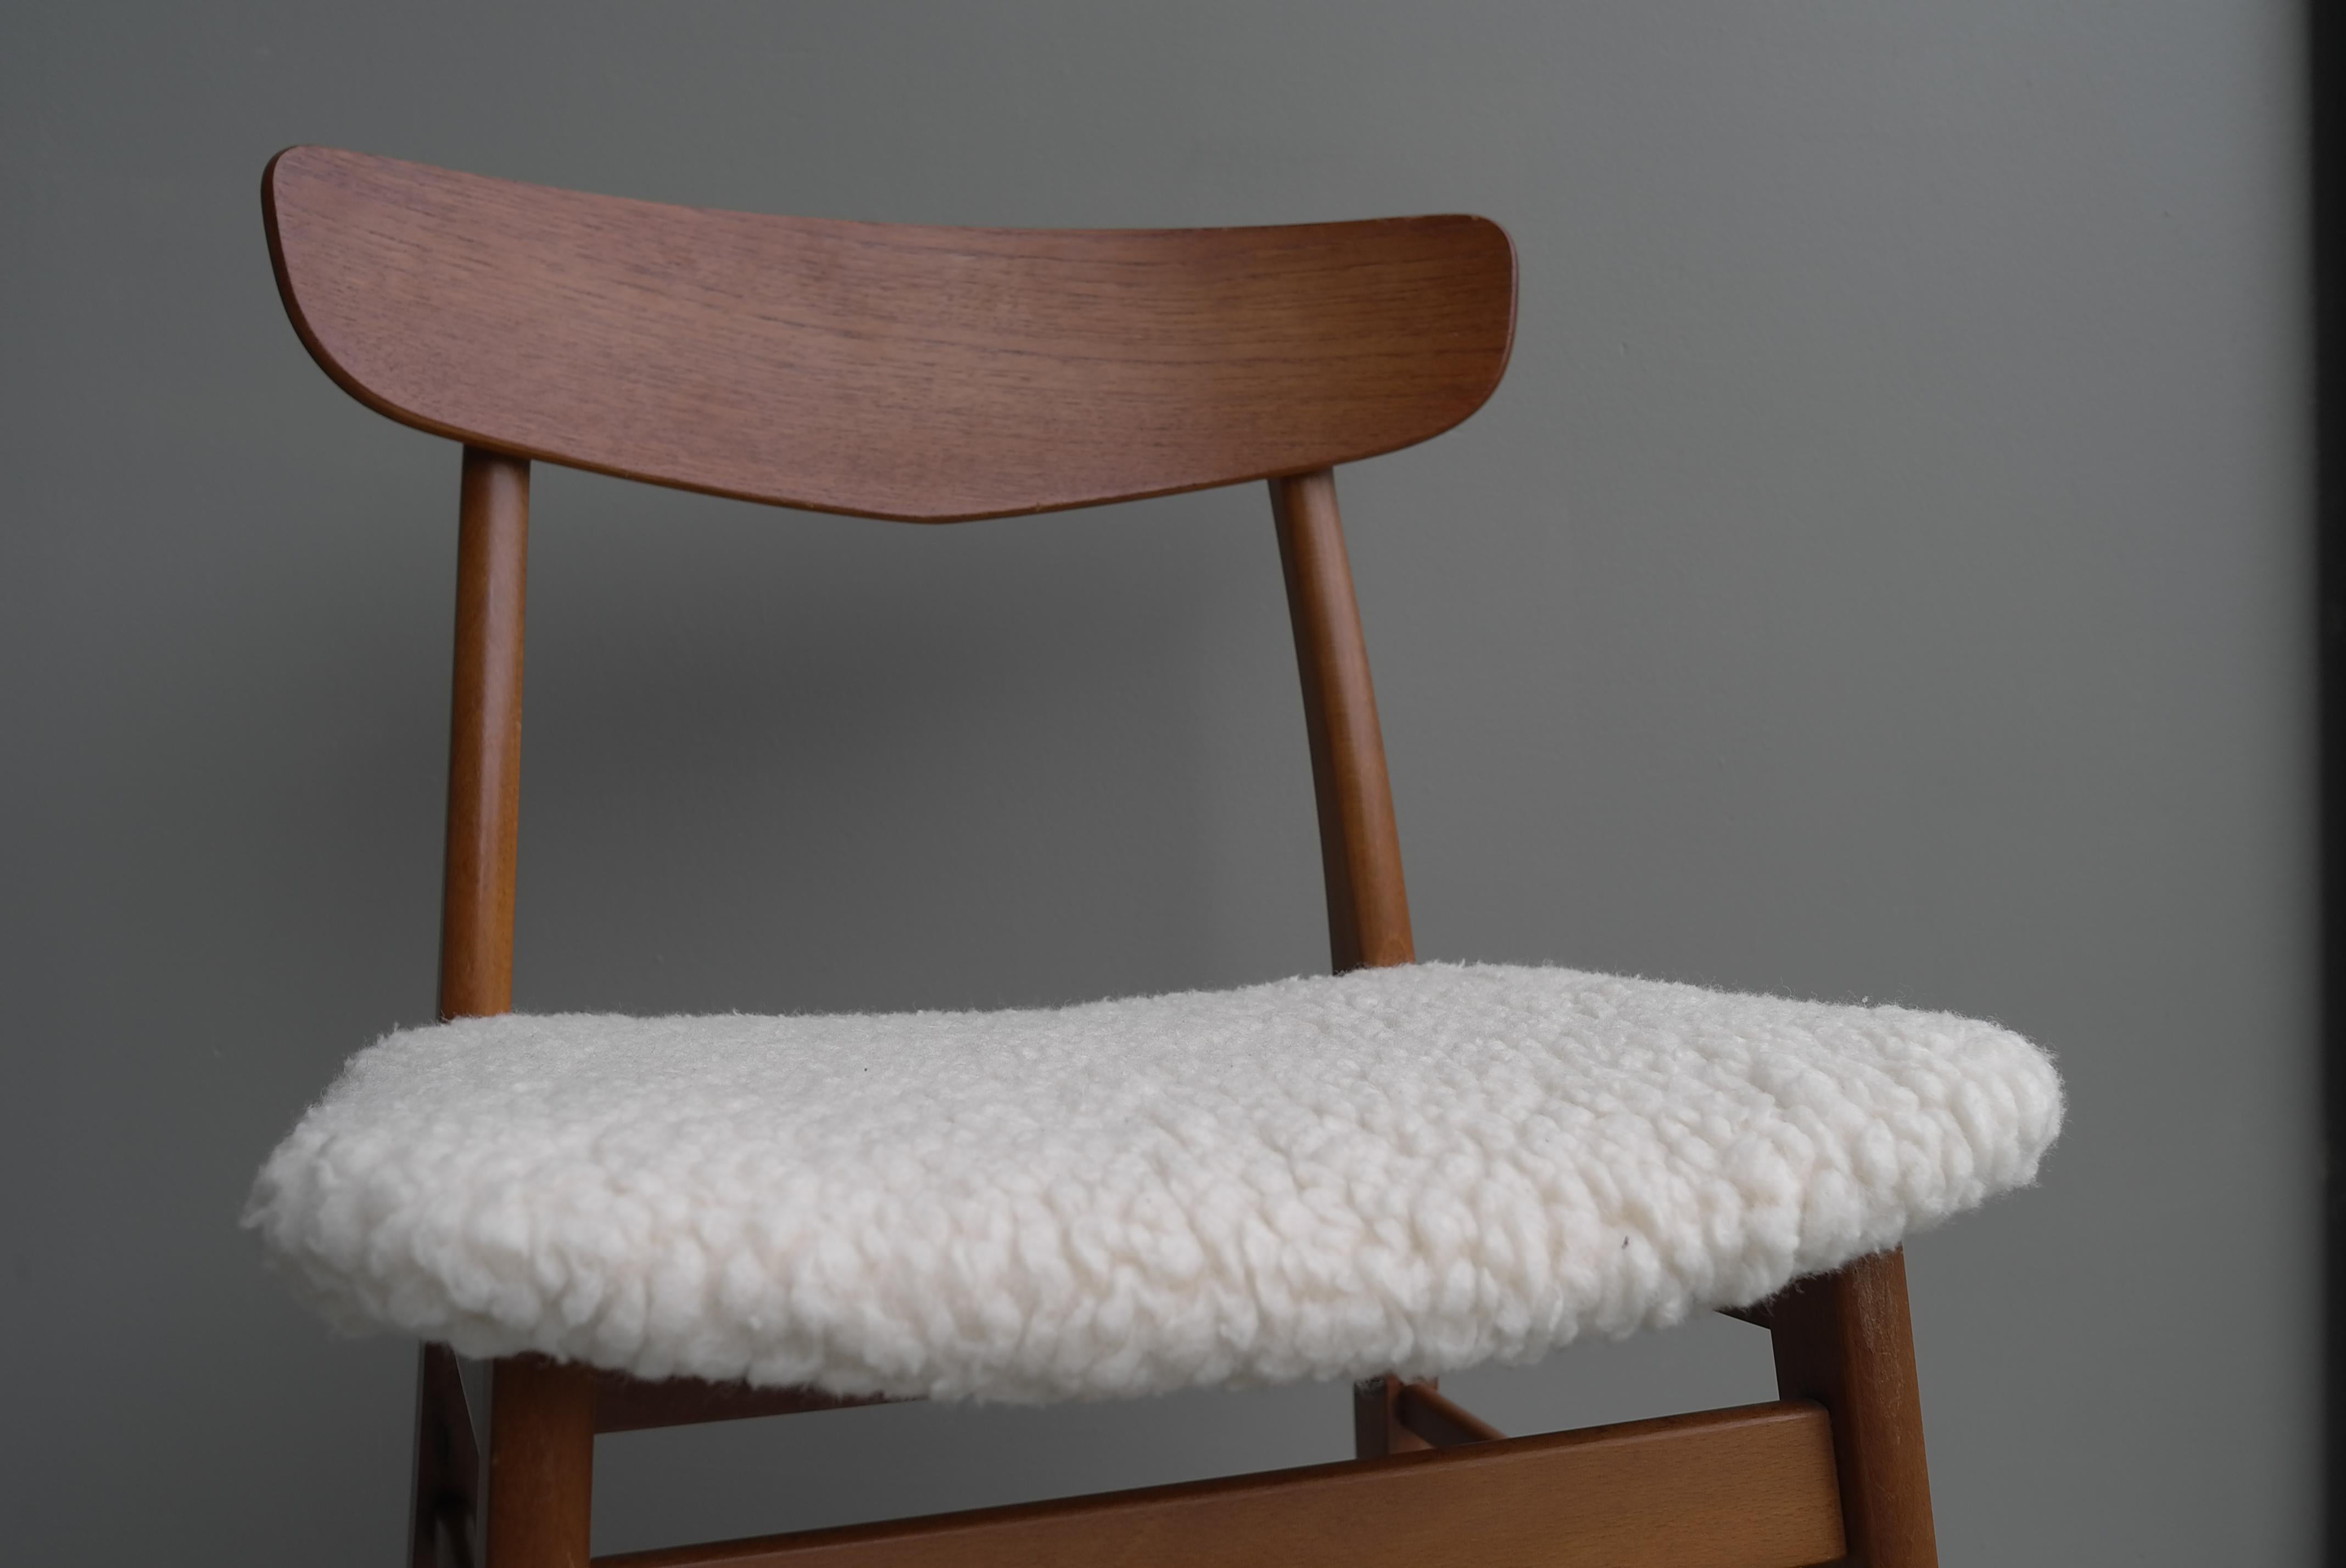 Six Teak Danish Heart Chairs with Seats in Pure Merino Wool, by Farstrup Møbler 6